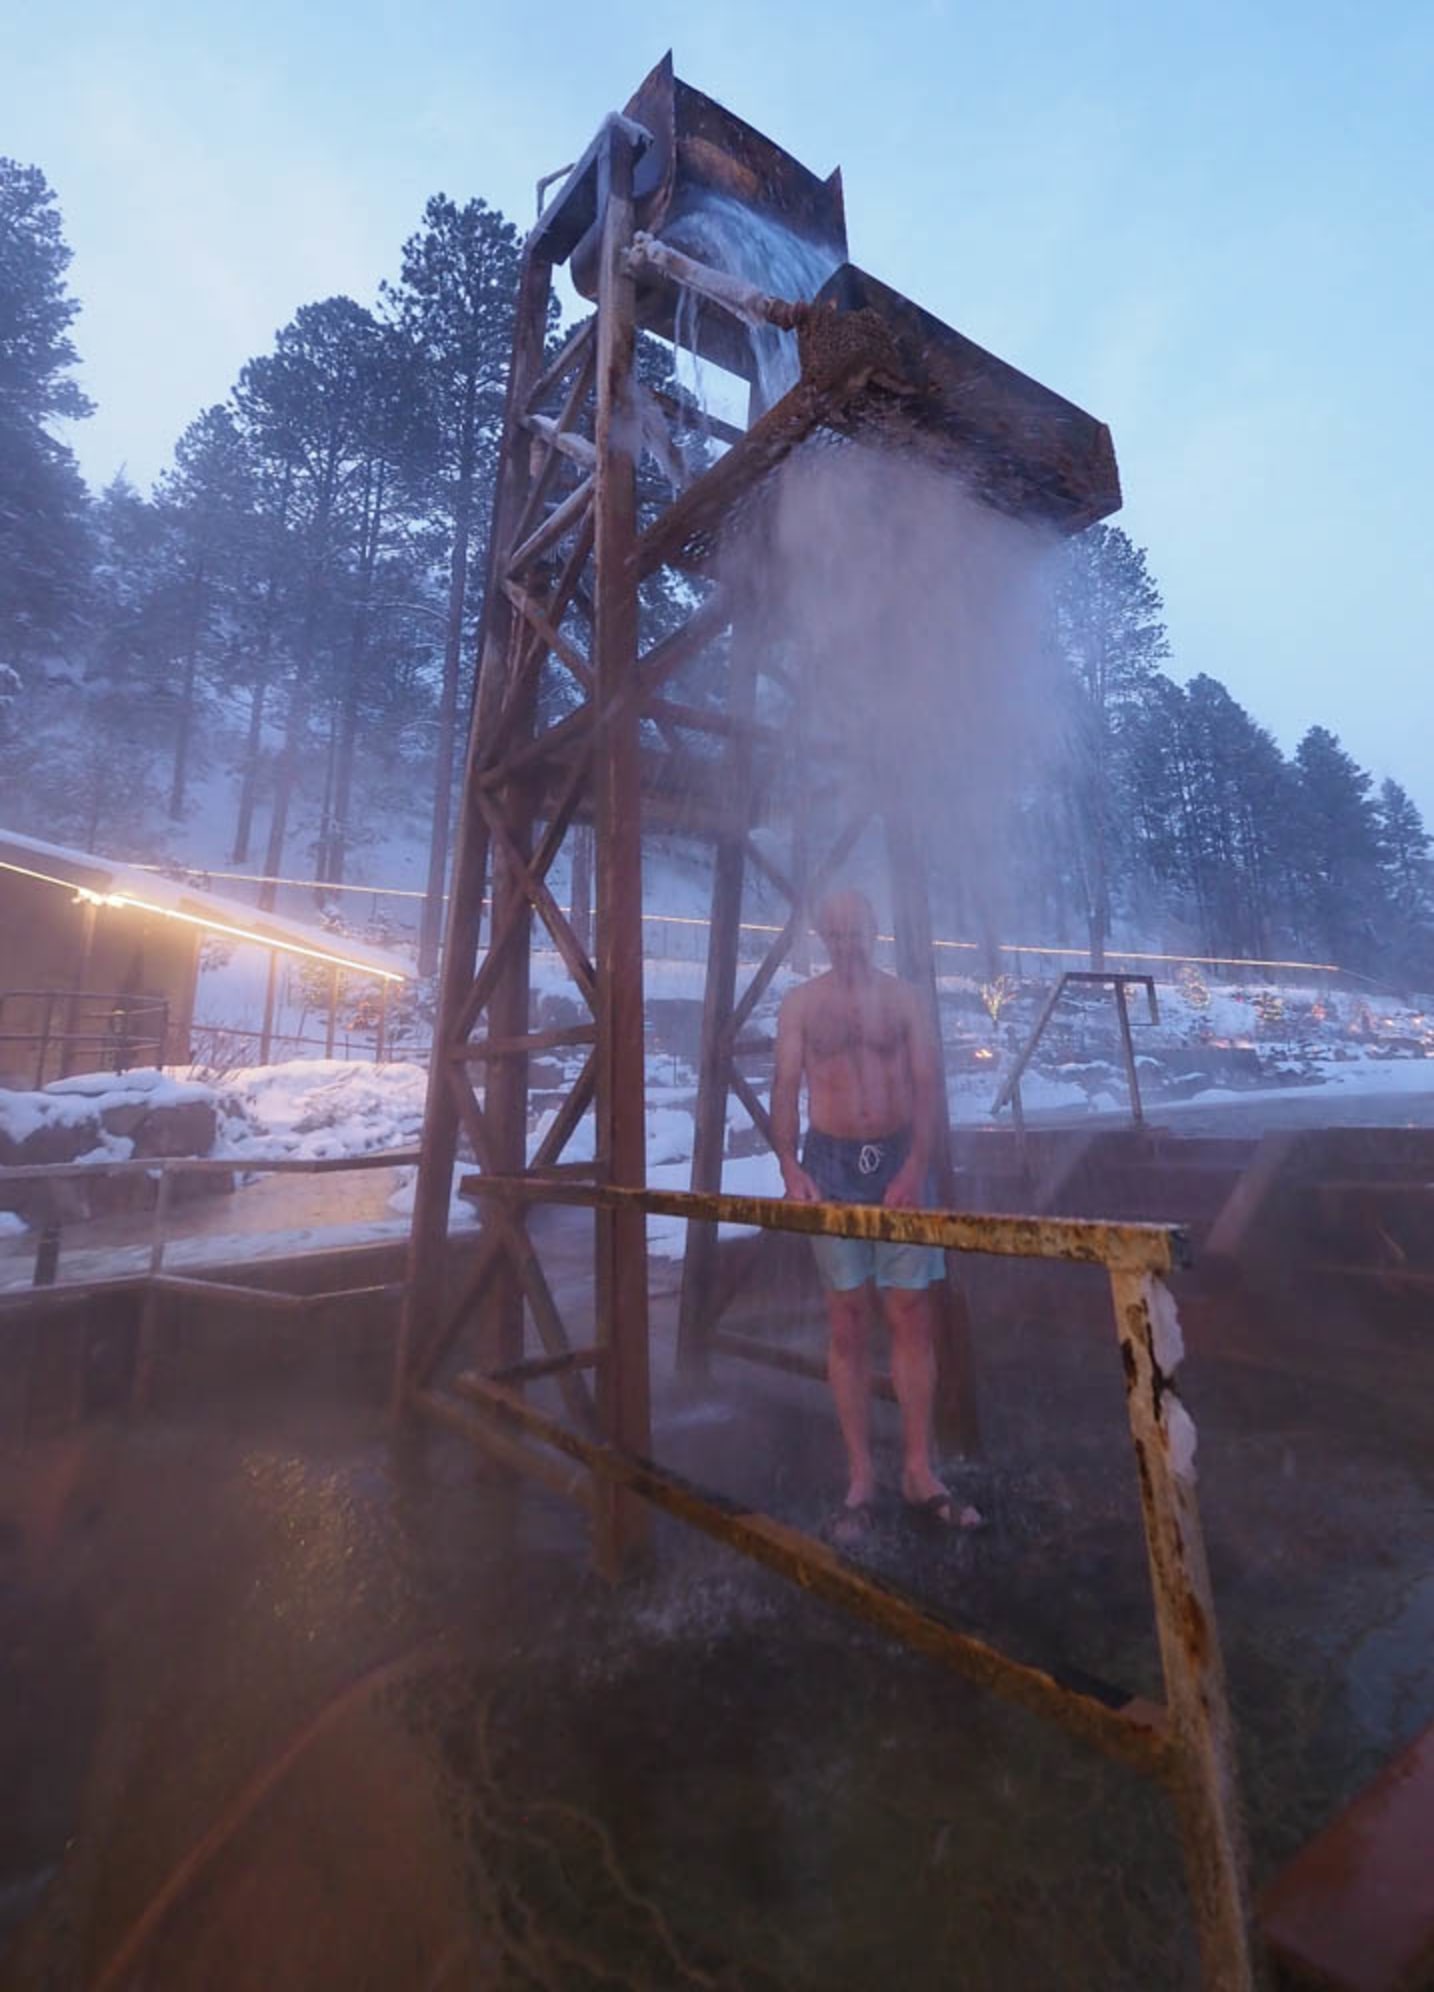 After a hard day of skiing, kick back at Durango Hot Springs picture